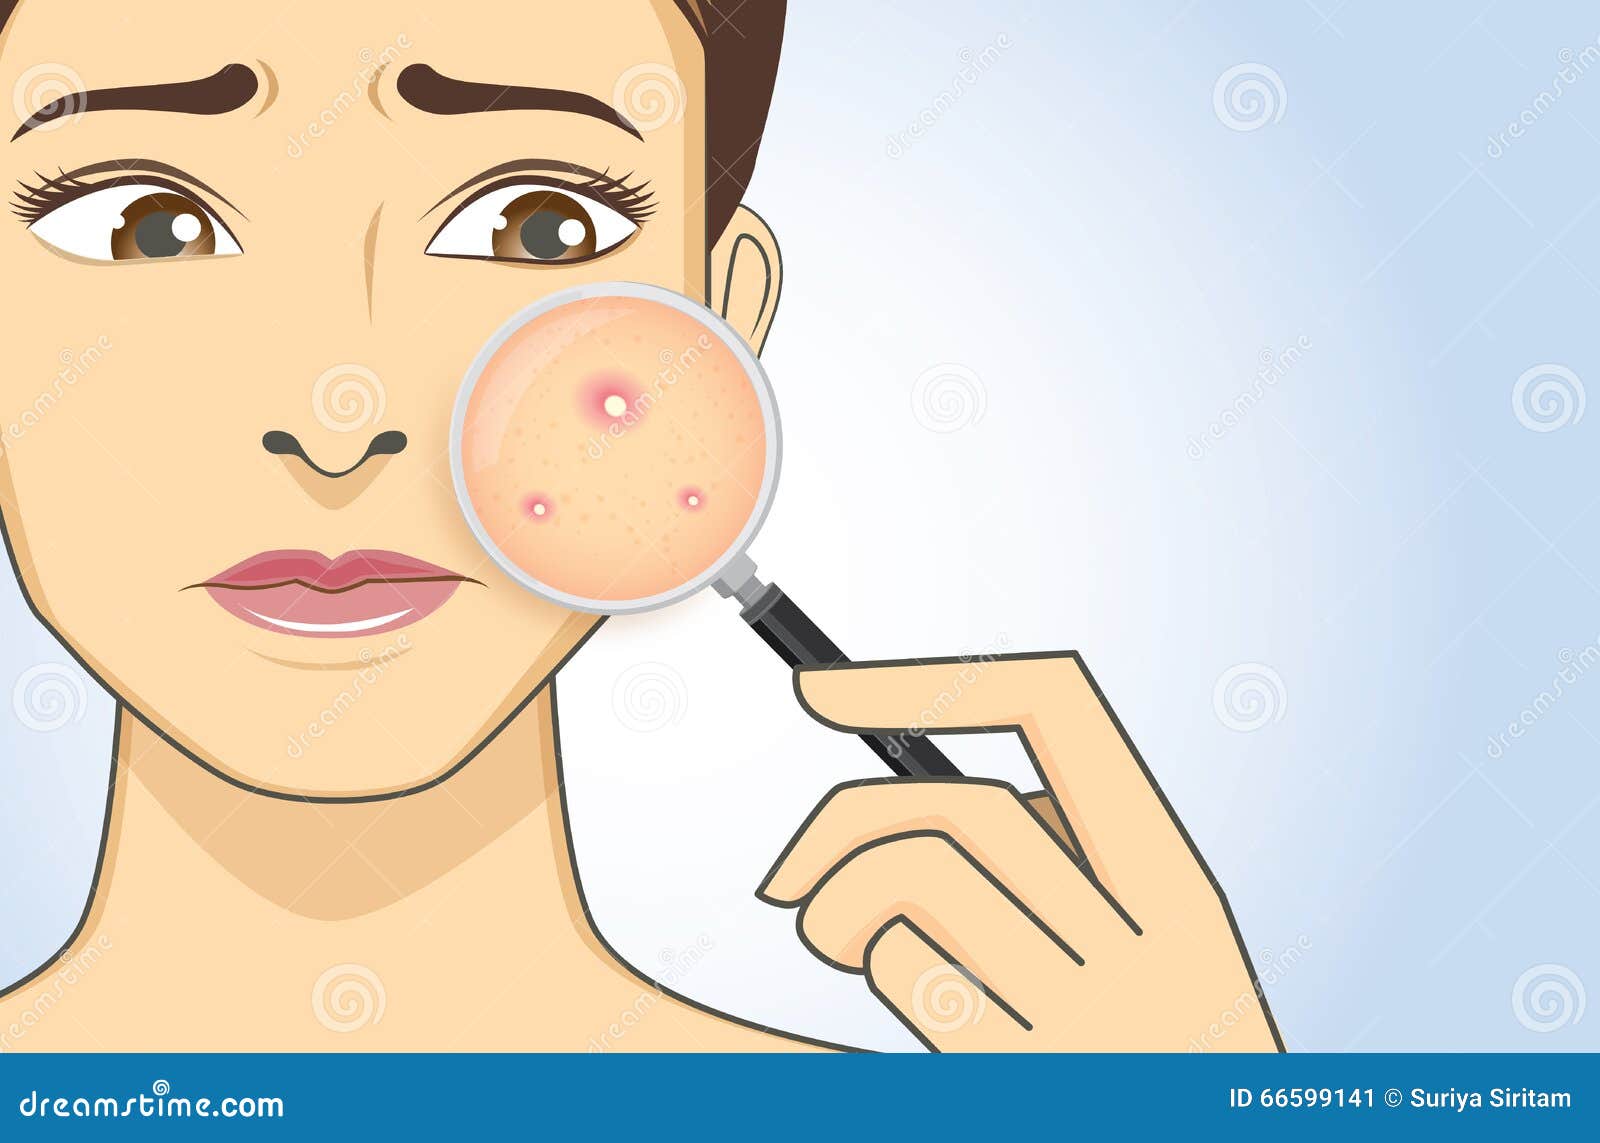 finding acne with magnifier